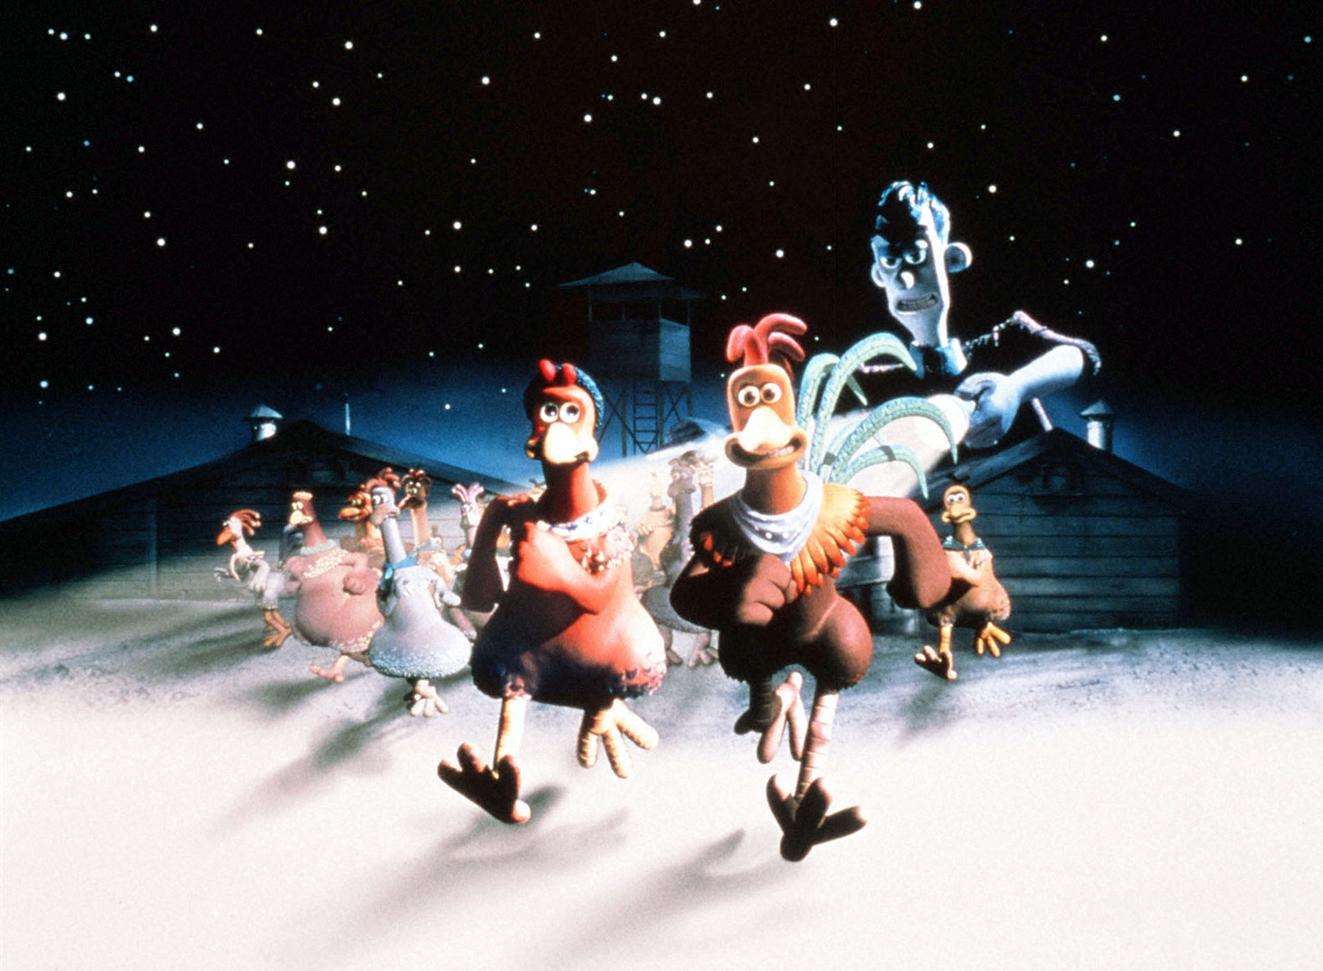 Chicken Run is an animated hommage to the Great Escape